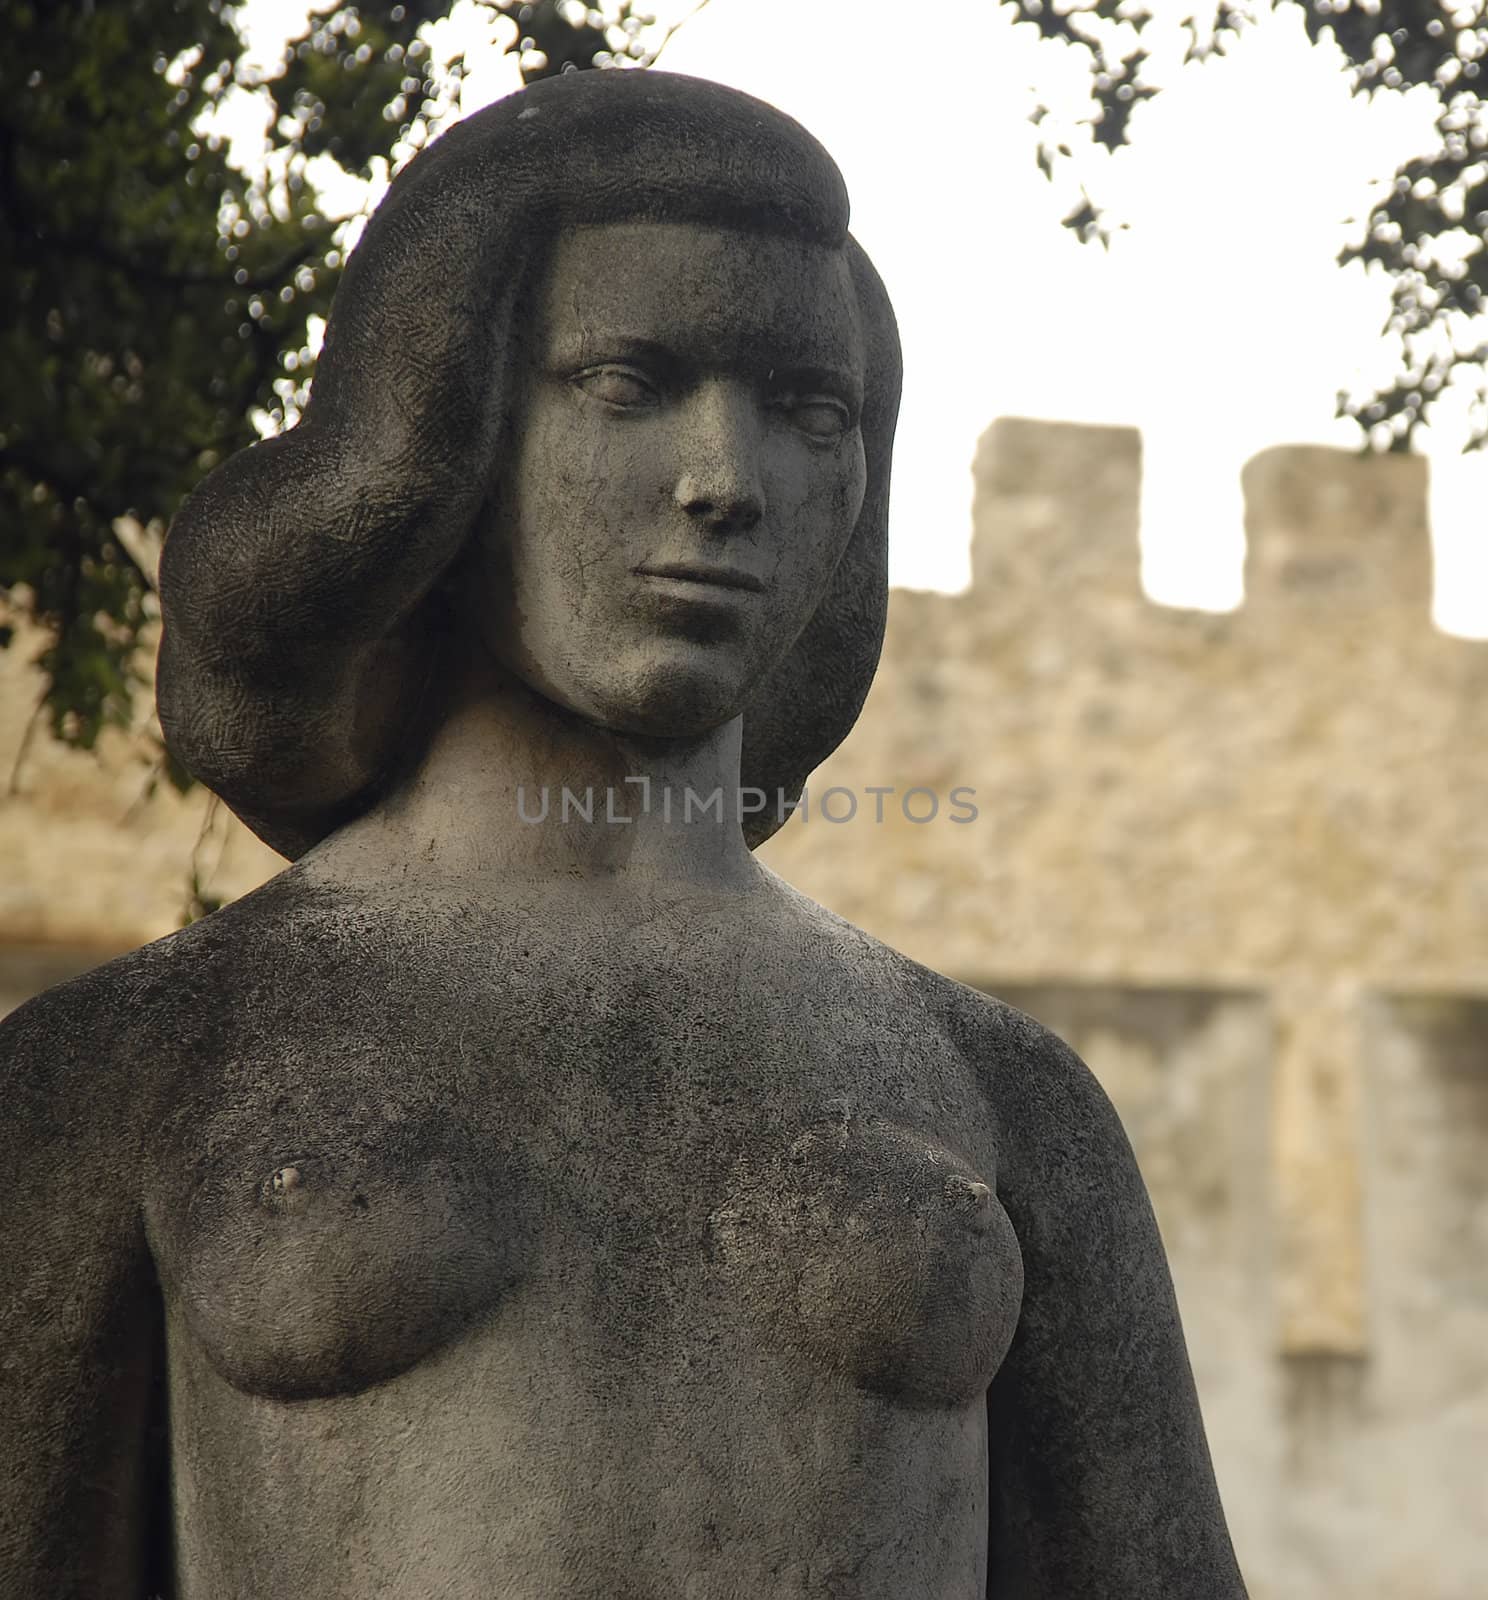 A medieval female statue adorns the grounds outside of a Portuguese castle